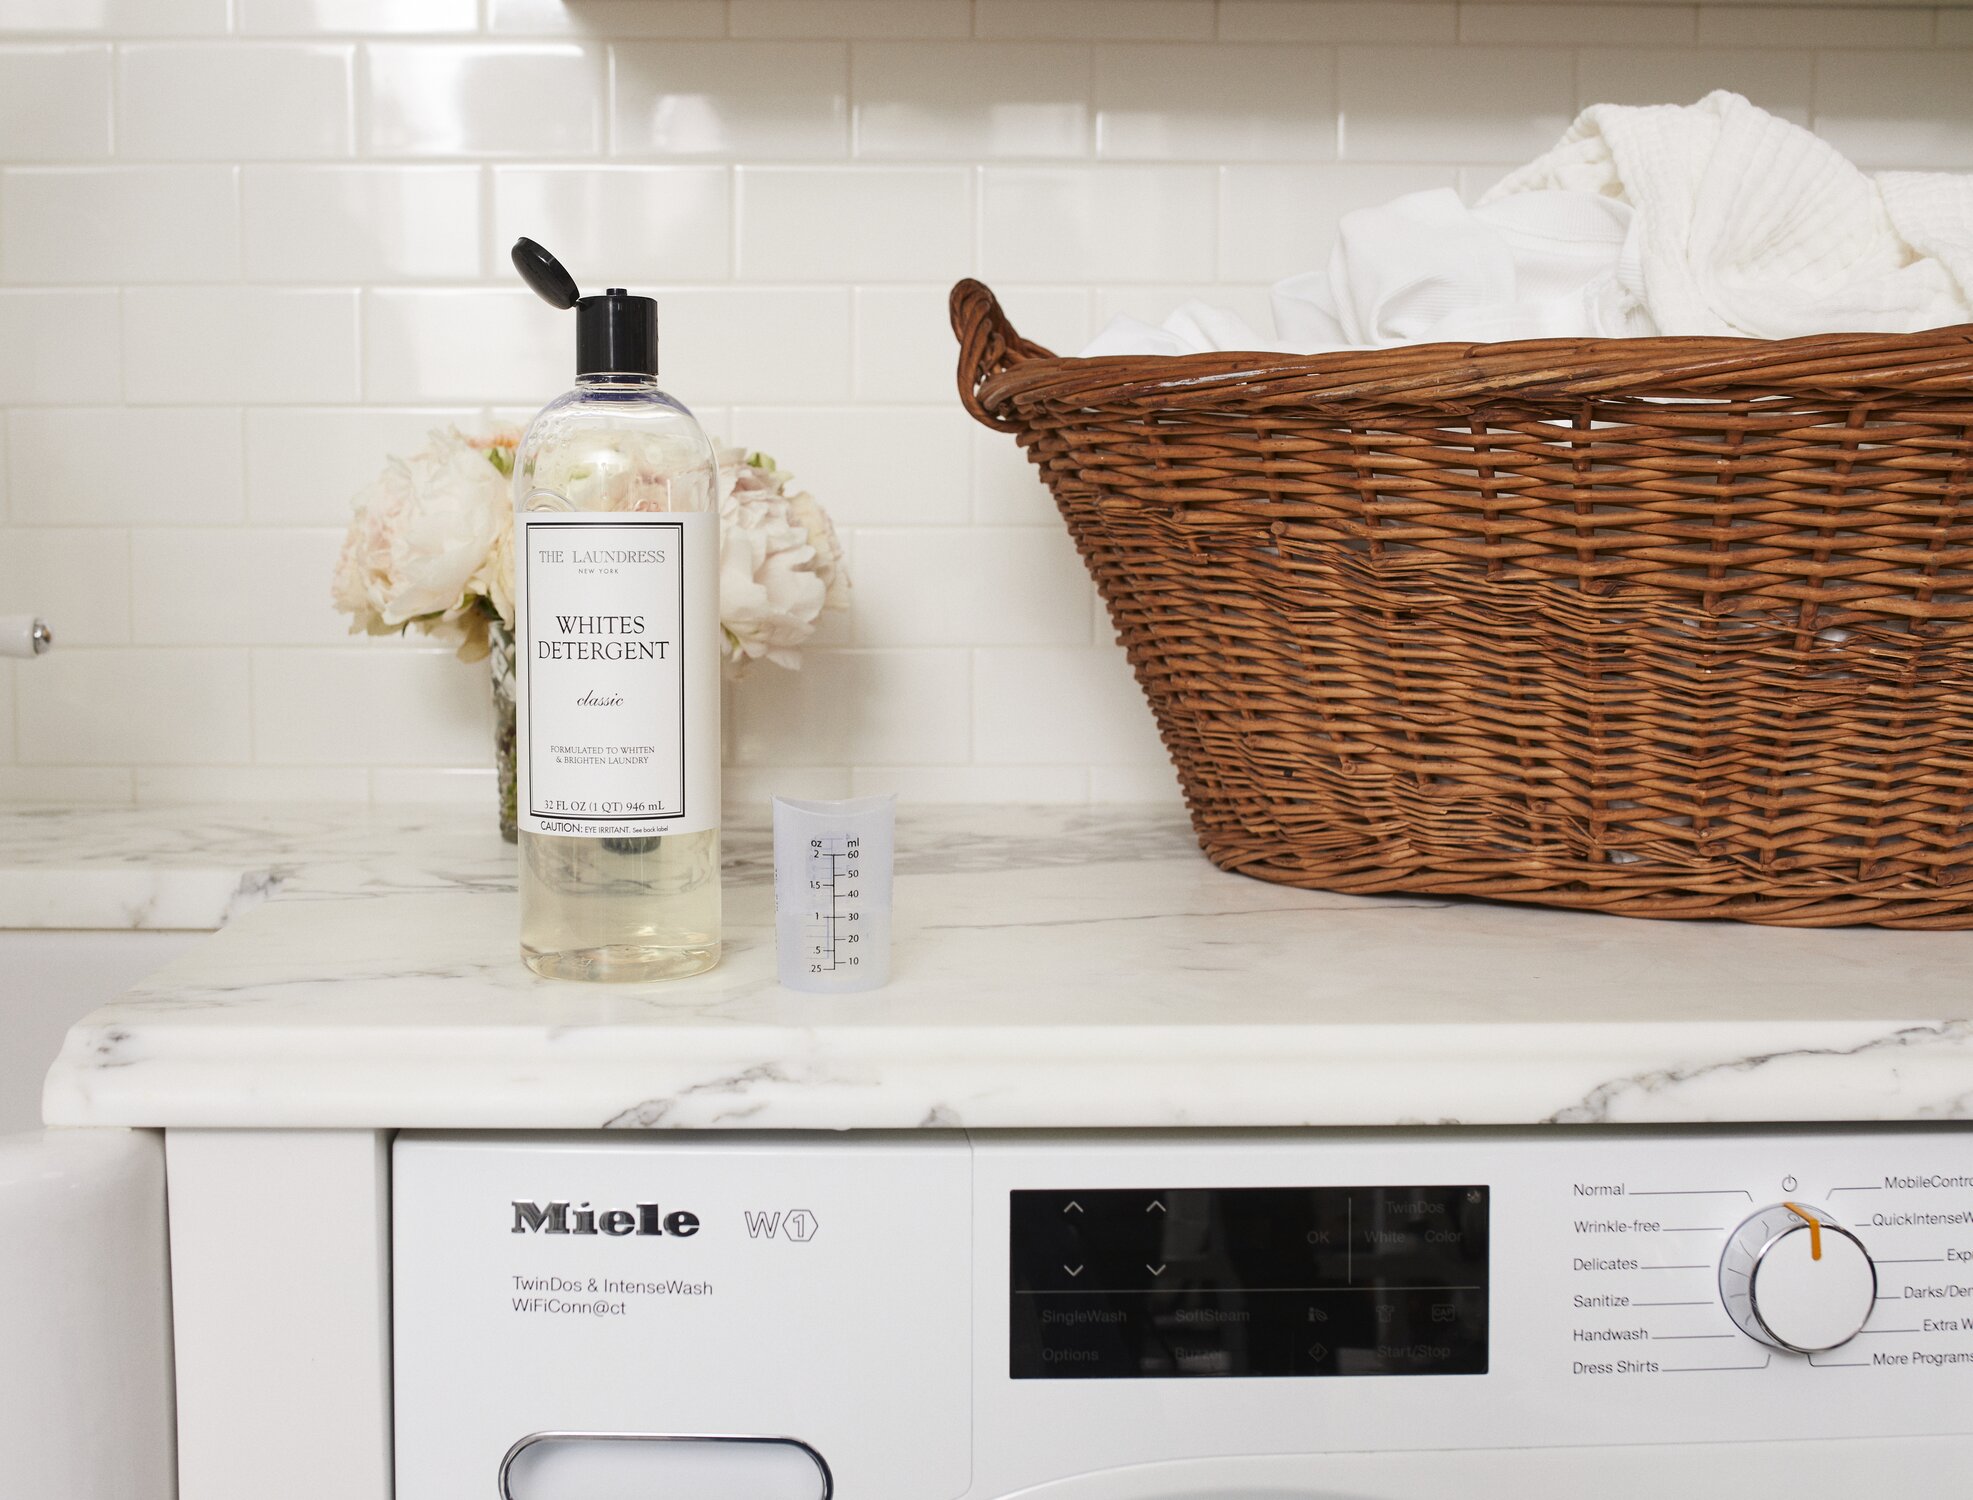 the laundress whites detergent and measuring cup on a counter next to a basket of white laundry